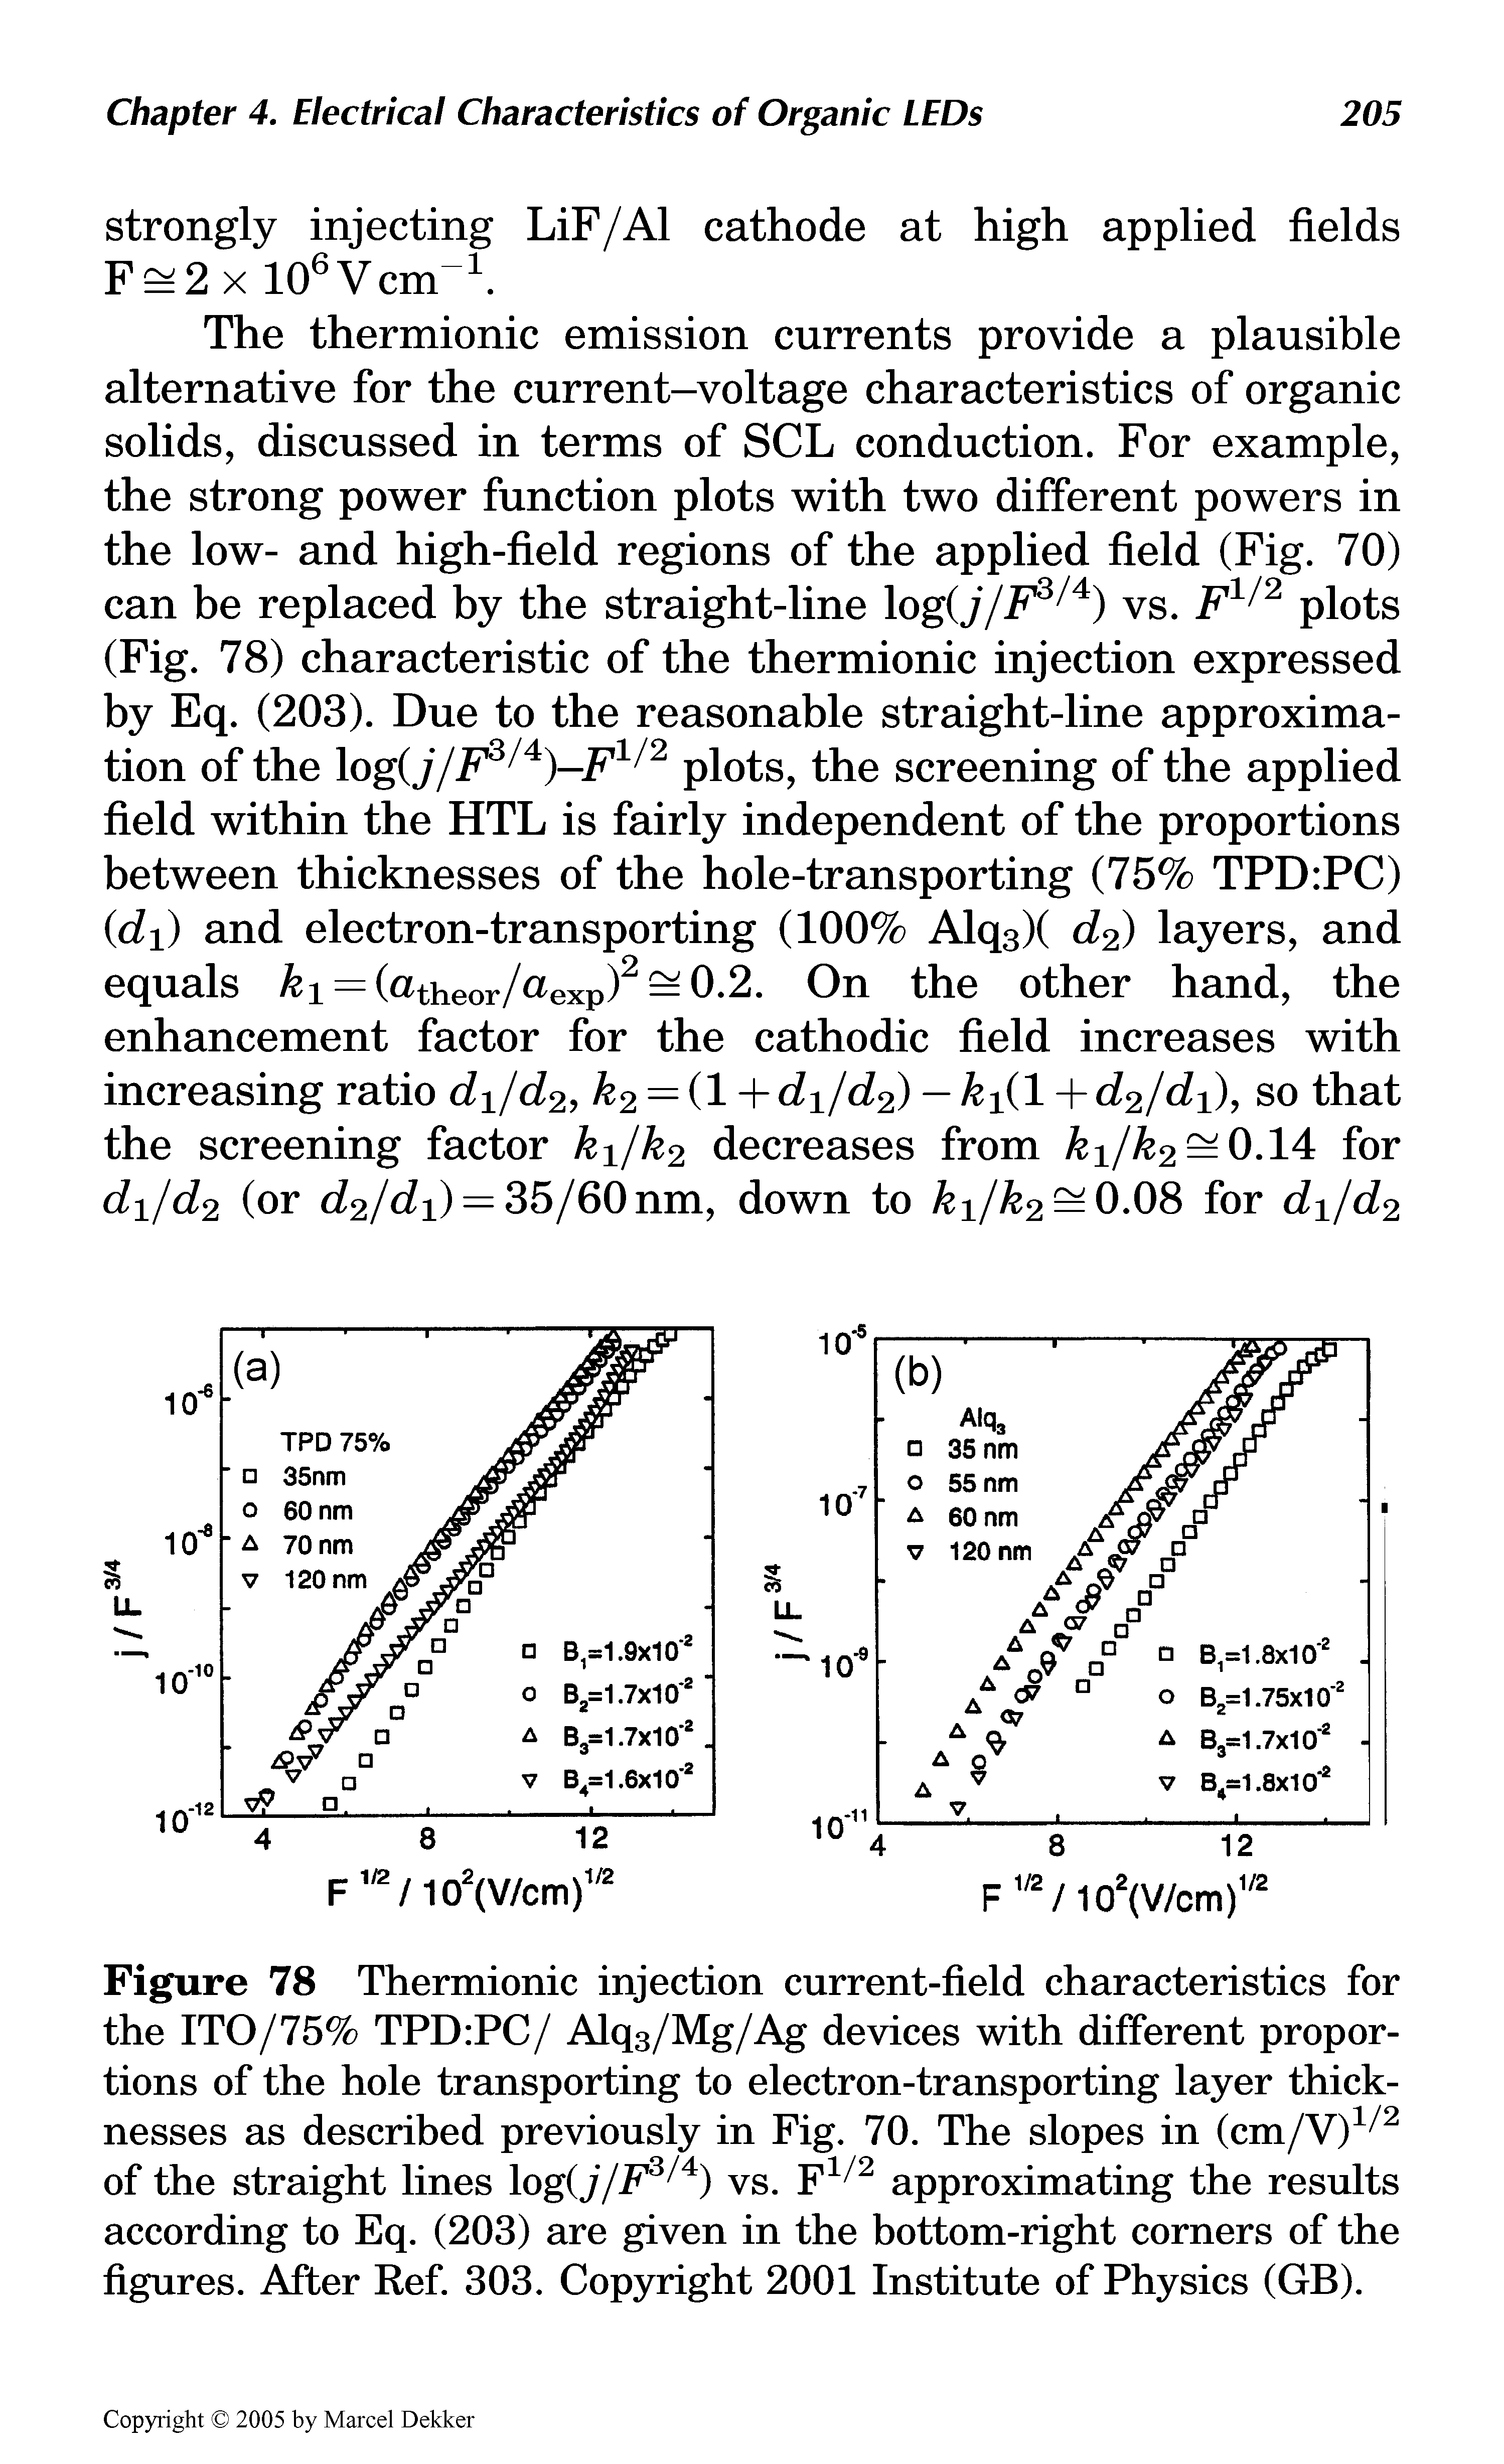 Figure 78 Thermionic injection current-field characteristics for the ITO/75% TPD PC/ Alq3/Mg/Ag devices with different proportions of the hole transporting to electron-transporting layer thicknesses as described previously in Fig. 70. The slopes in (cm/V)12 of the straight lines log(j/F3 4) vs. F1,/2 approximating the results according to Eq. (203) are given in the bottom-right corners of the figures. After Ref. 303. Copyright 2001 Institute of Physics (GB).